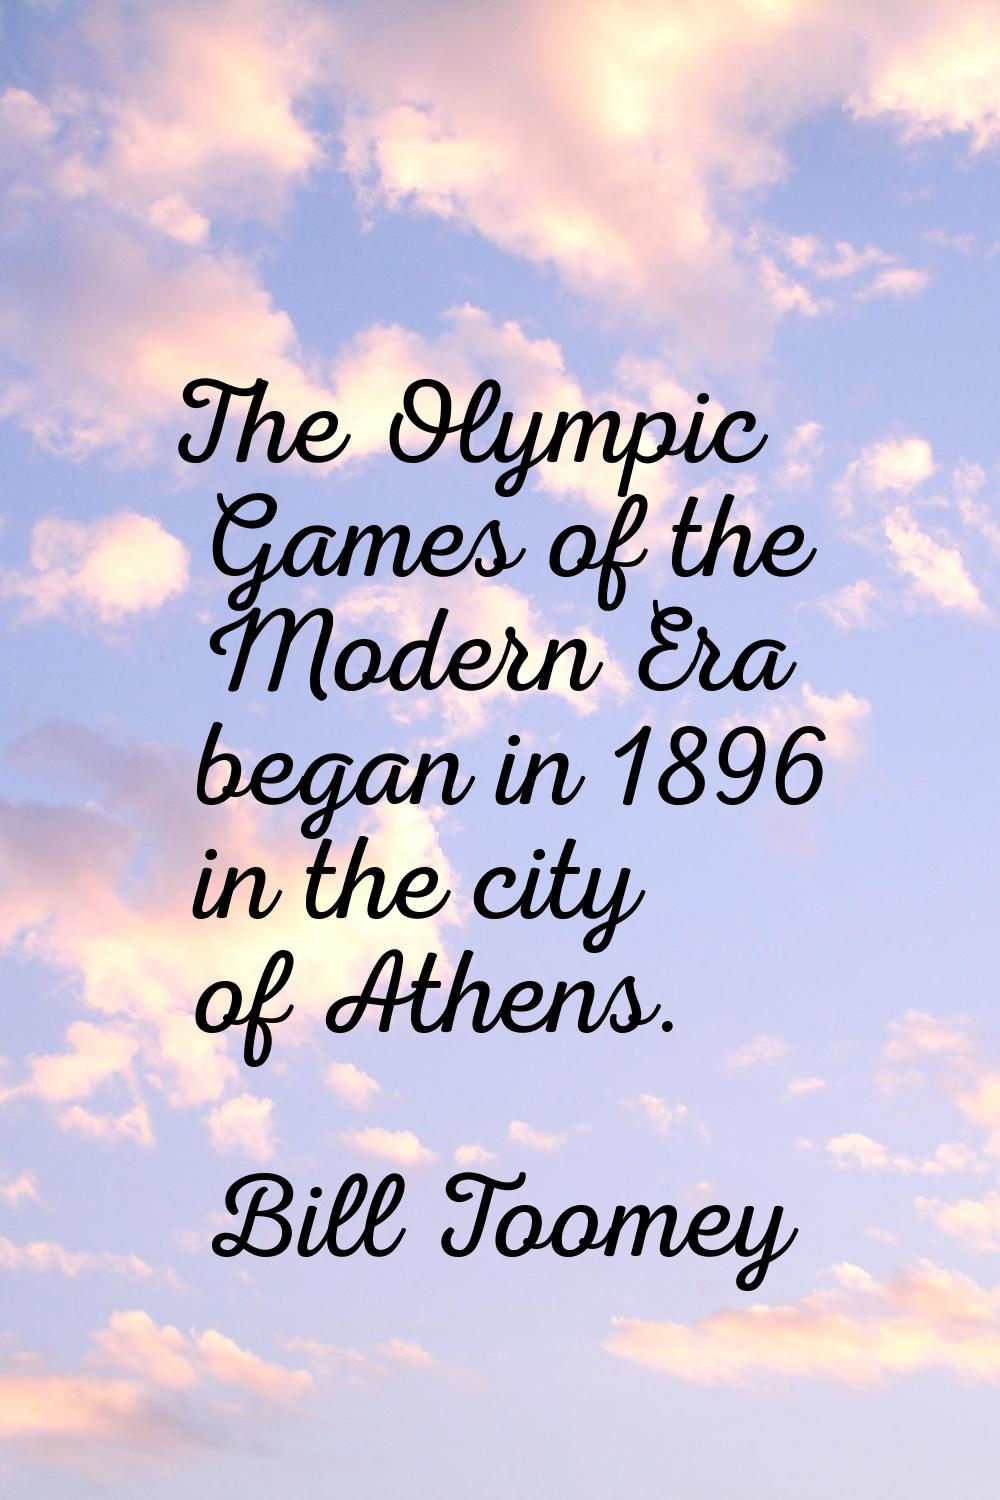 The Olympic Games of the Modern Era began in 1896 in the city of Athens.